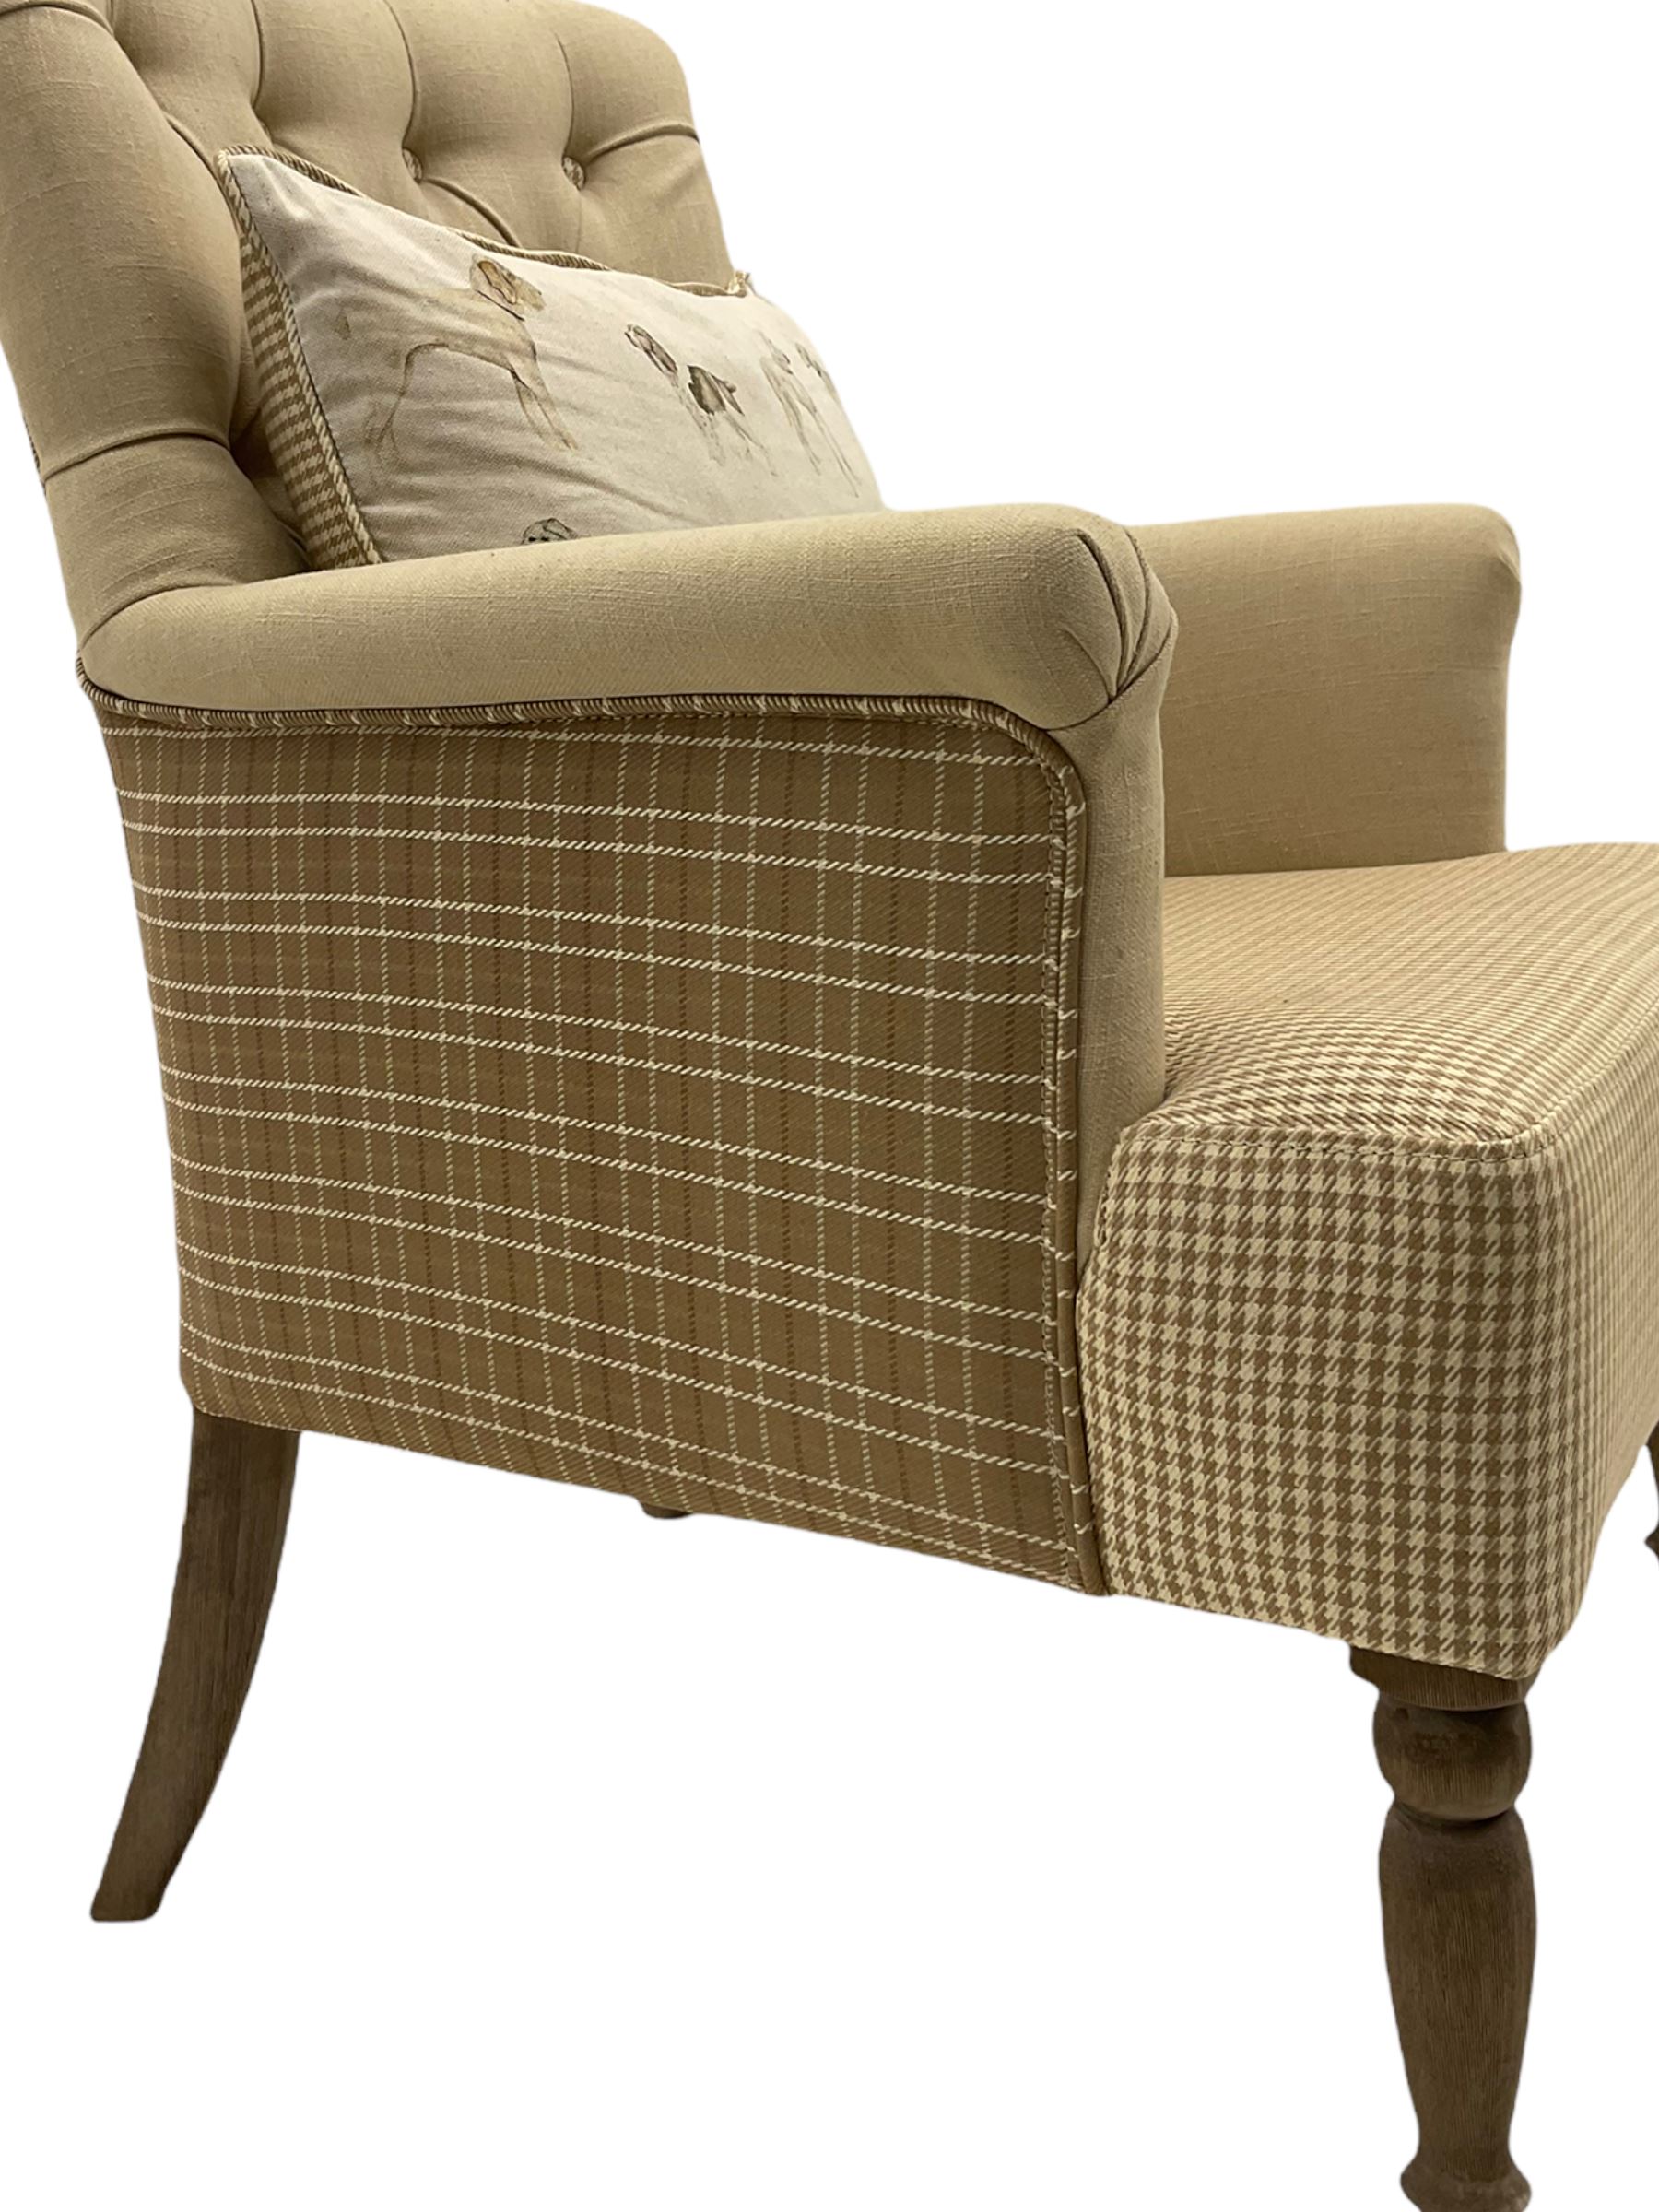 Voyage Maisonette - Nero Armchair upholstered in beige and check fabric - Image 6 of 8